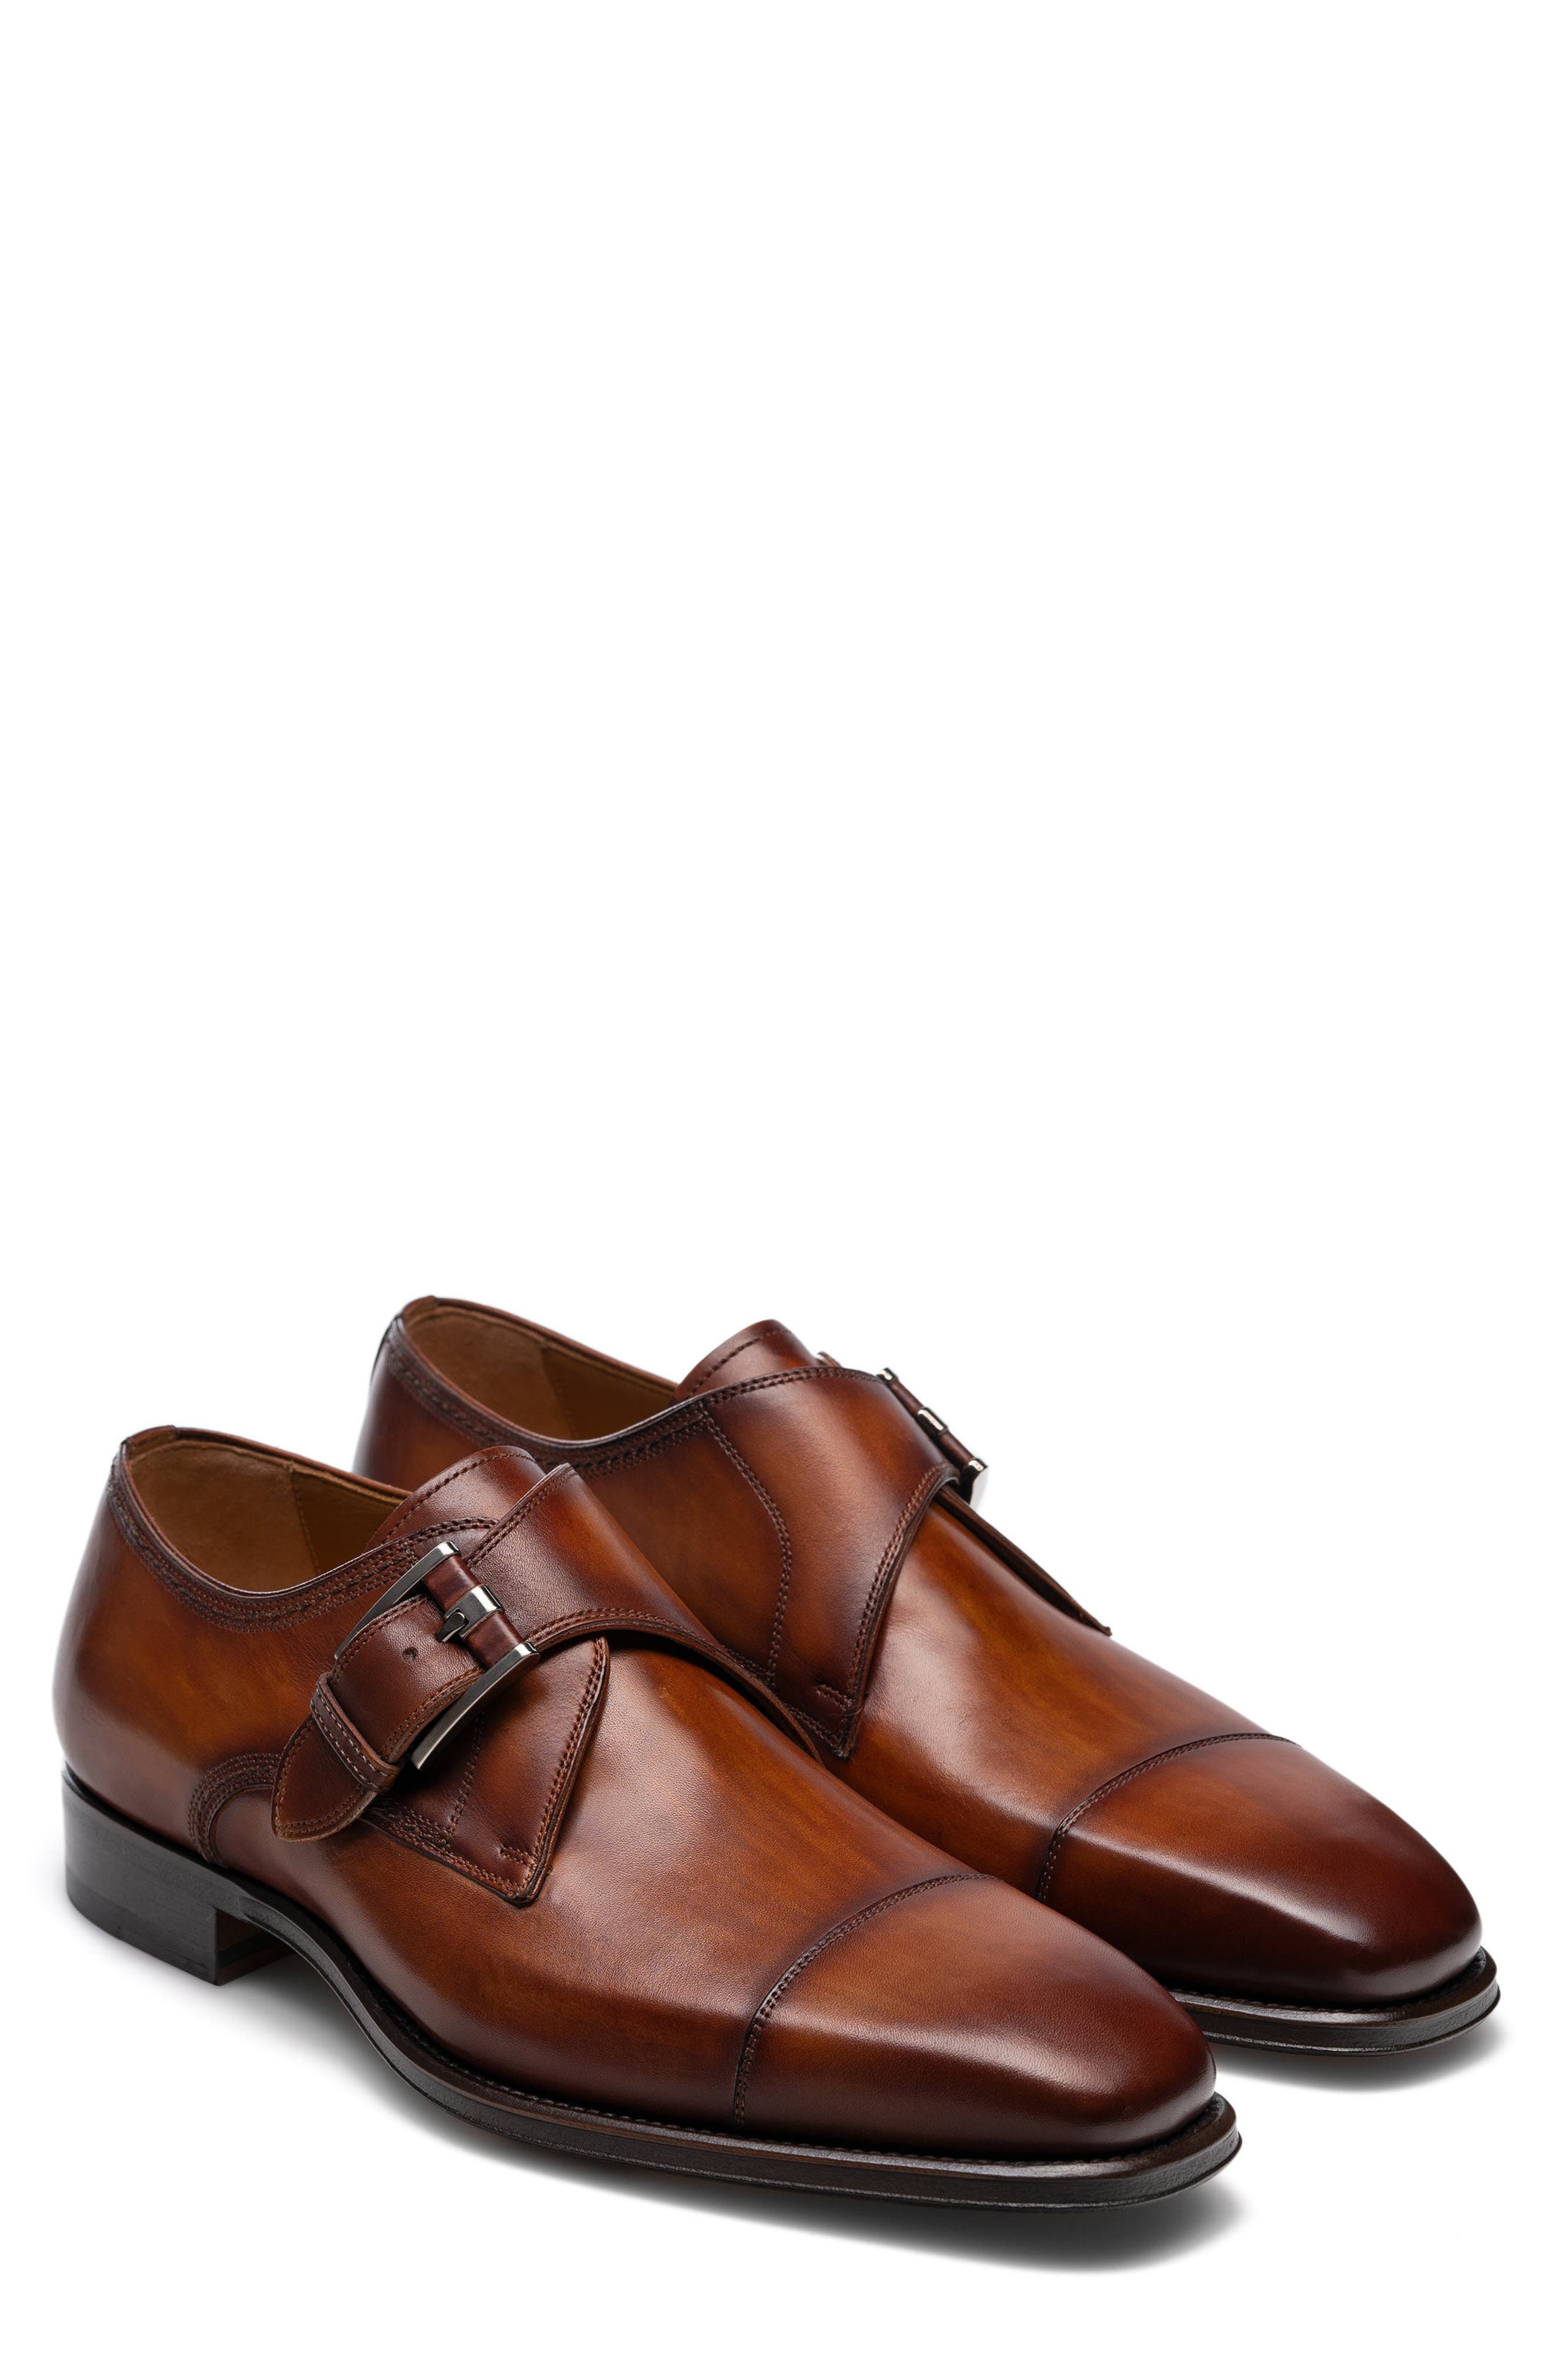 magnanni casual shoes